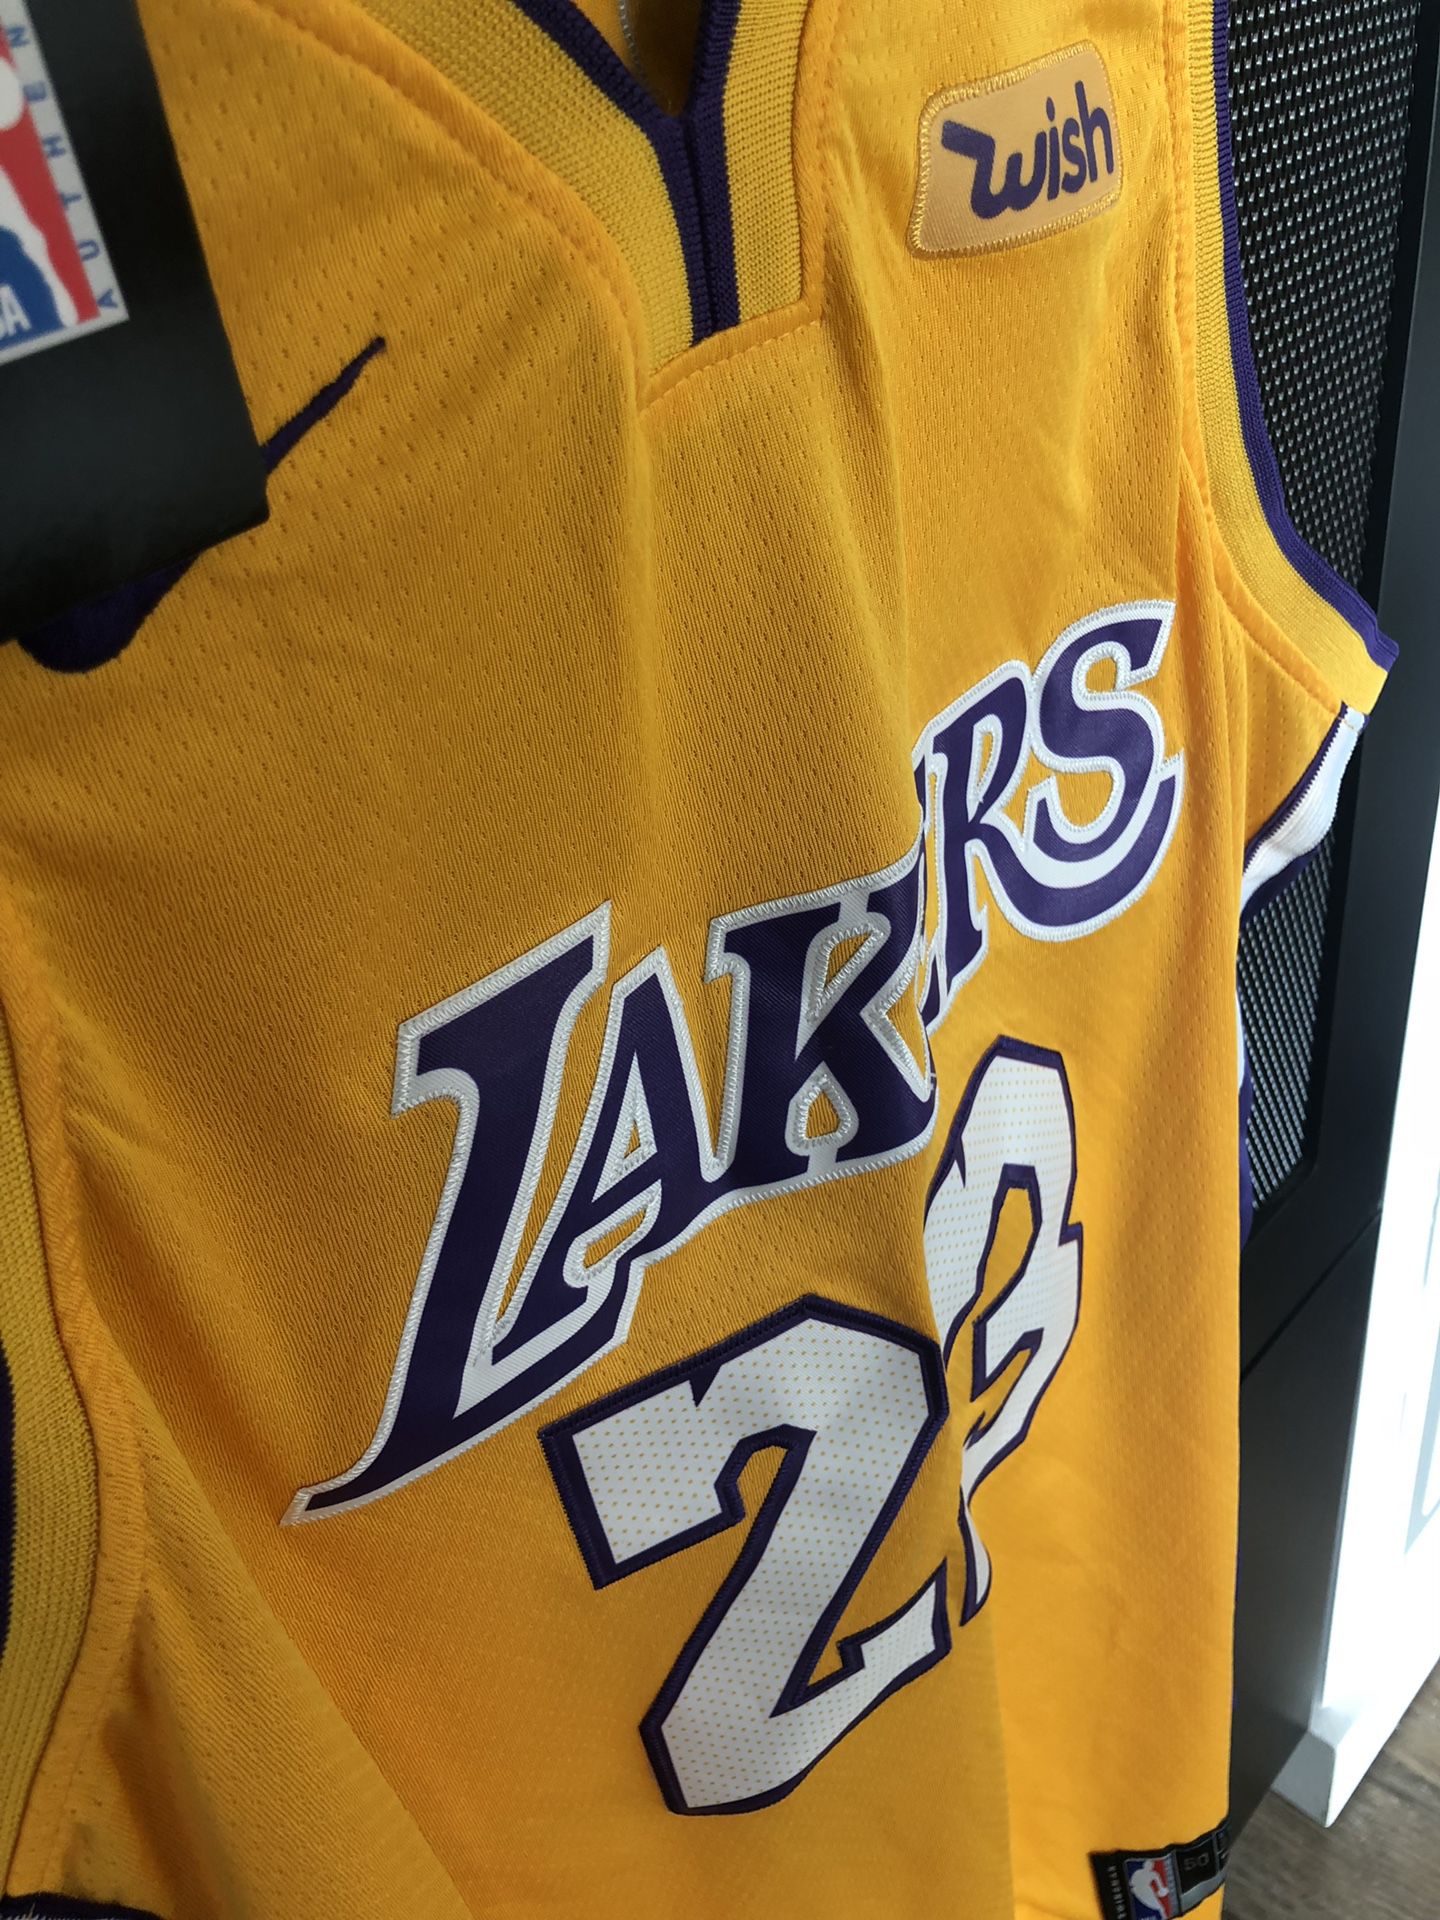 Lebron James Lakers Jersey (Gold). Perfect last minute Christmas Gift!